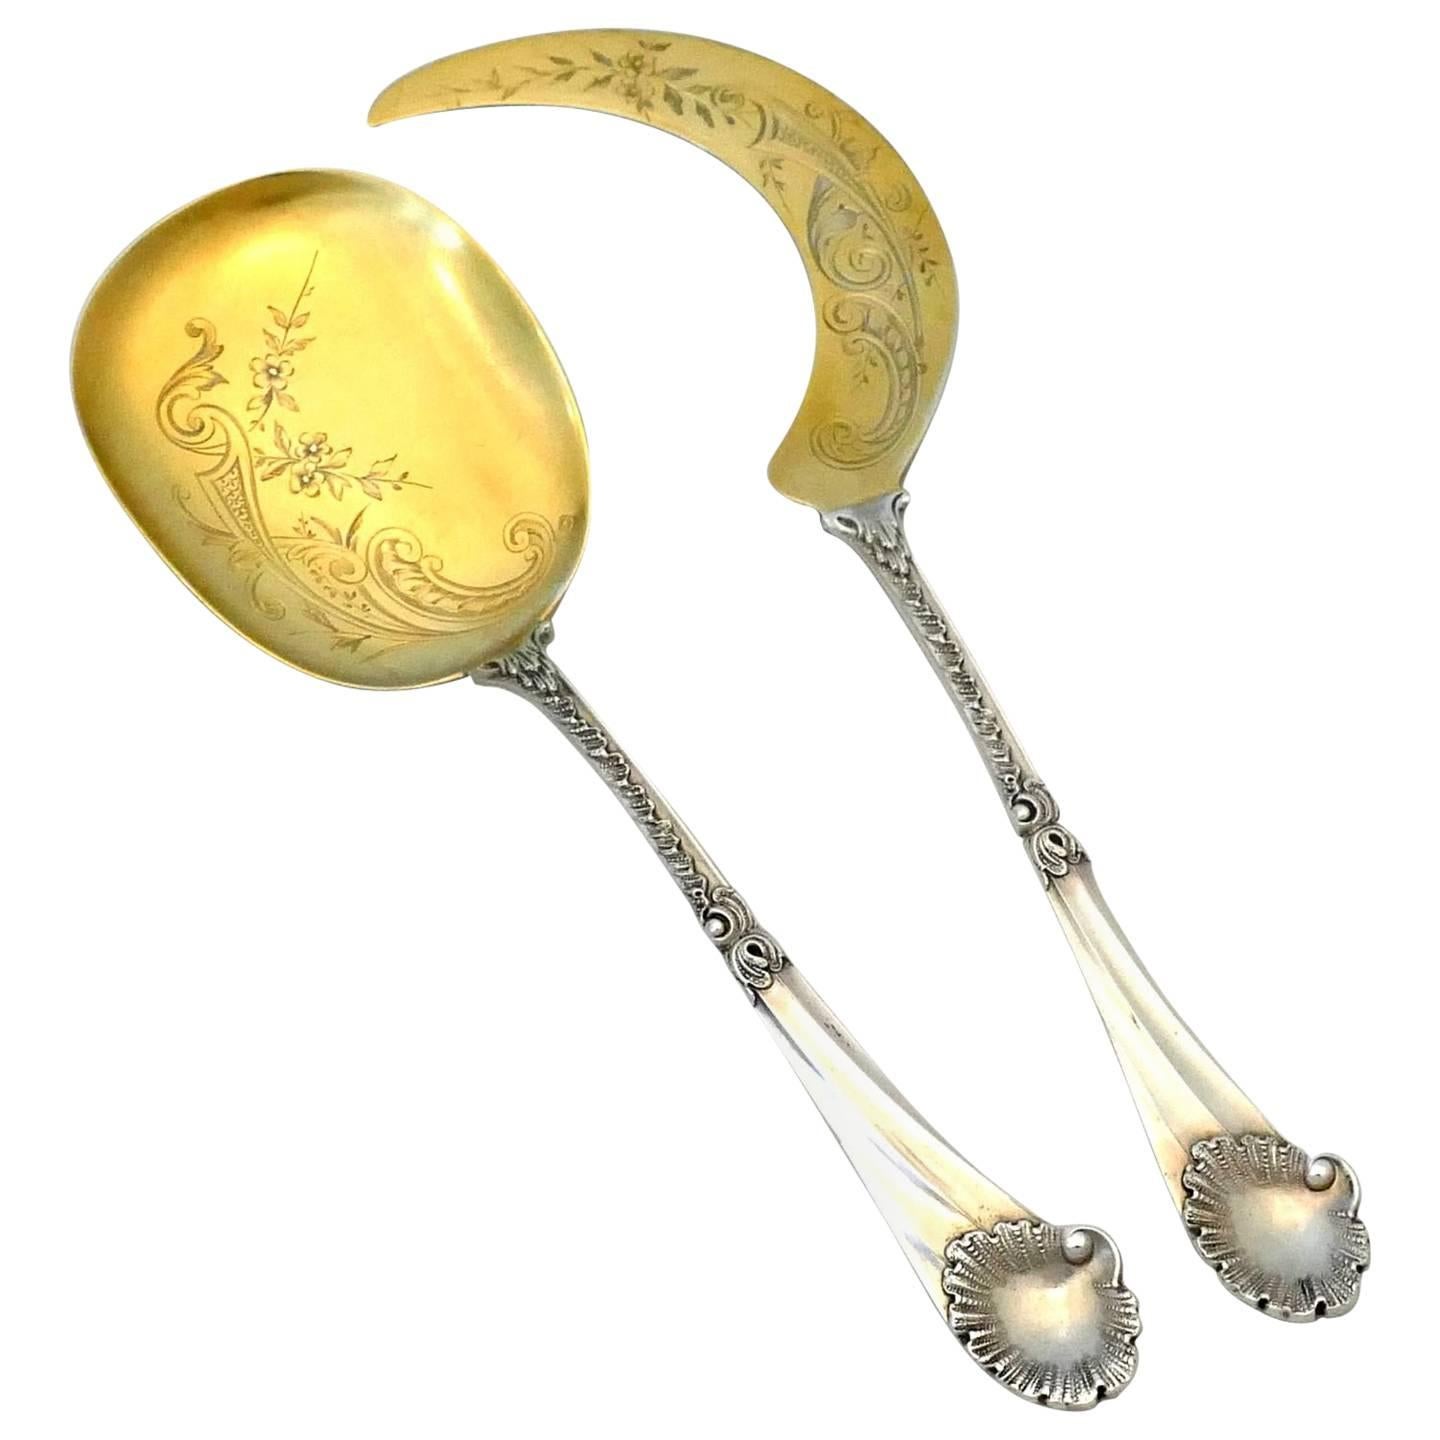 Soufflot Rare French All Sterling Silver 18-Karat Gold Ice Cream Servers For Sale